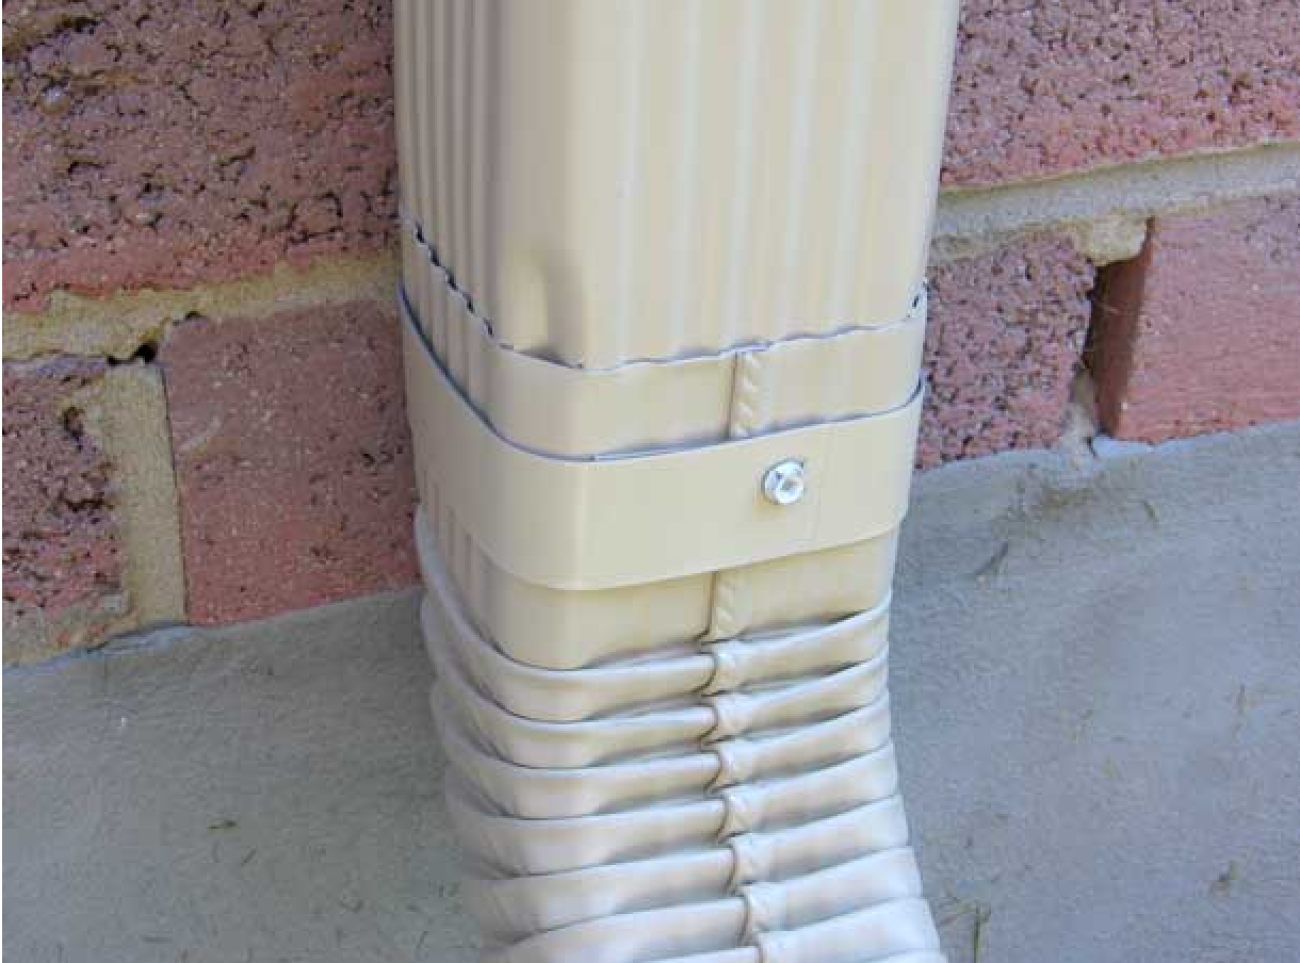 Case of Aluminum Downspout  Pipe Bands 27 Colors In Stock 2 Sizes Available (100 units)